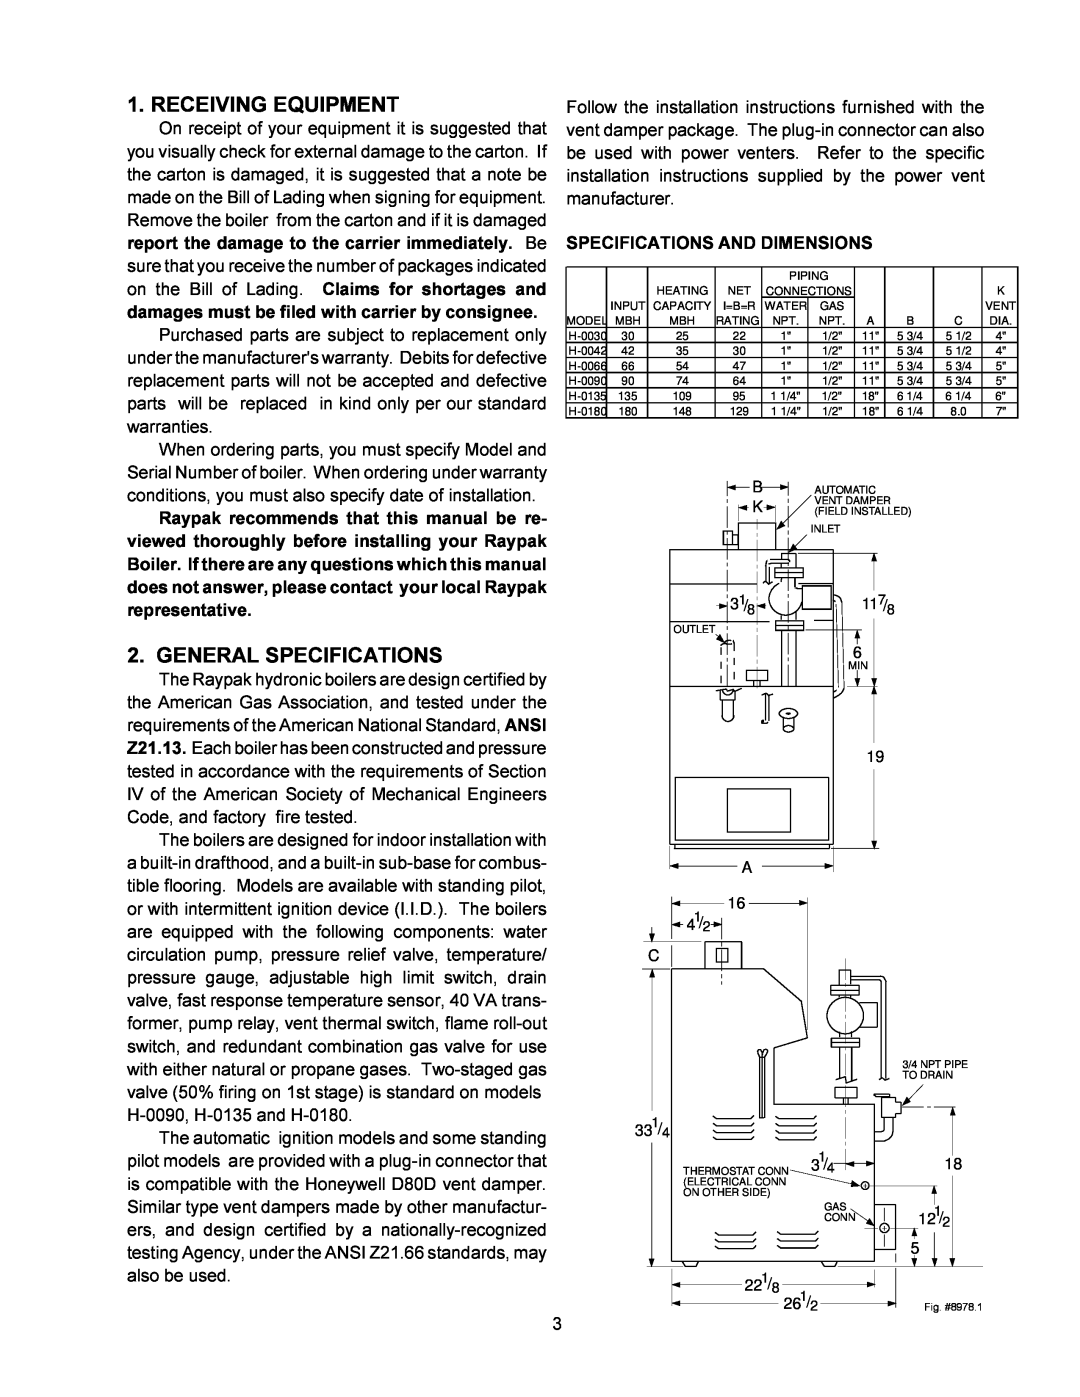 Raypak 0090B 0135B installation instructions Receiving Equipment, General Specifications, Specifications And Dimensions 